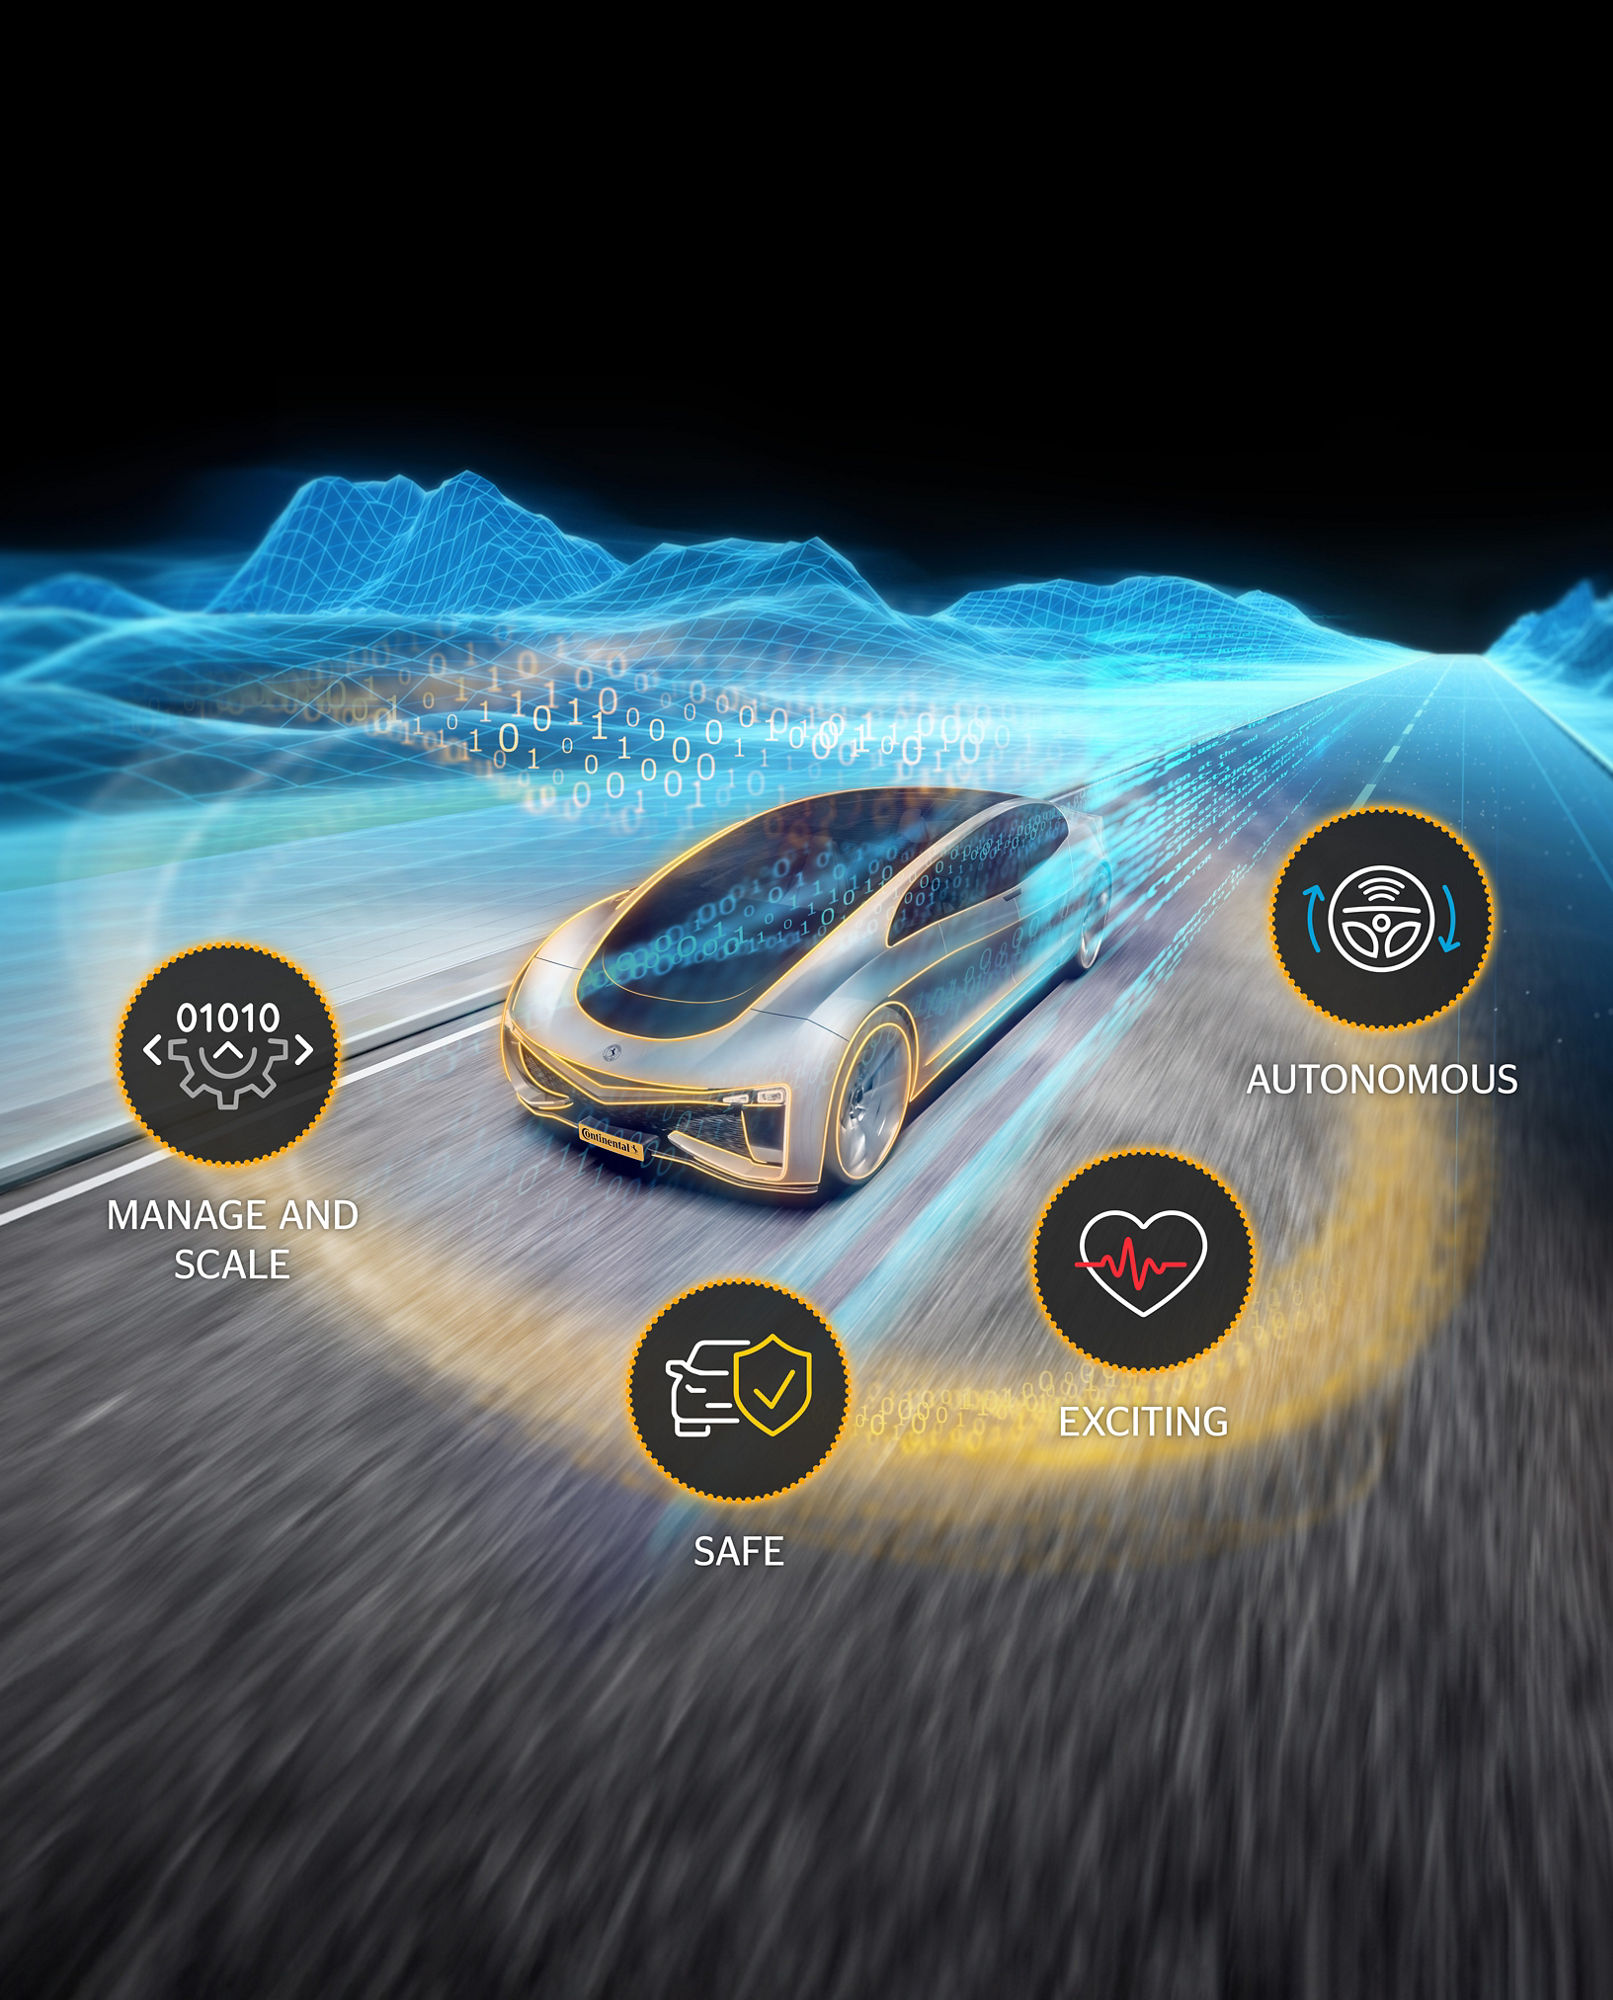 Future connected cars: Focus on back-seat comfort, versatility